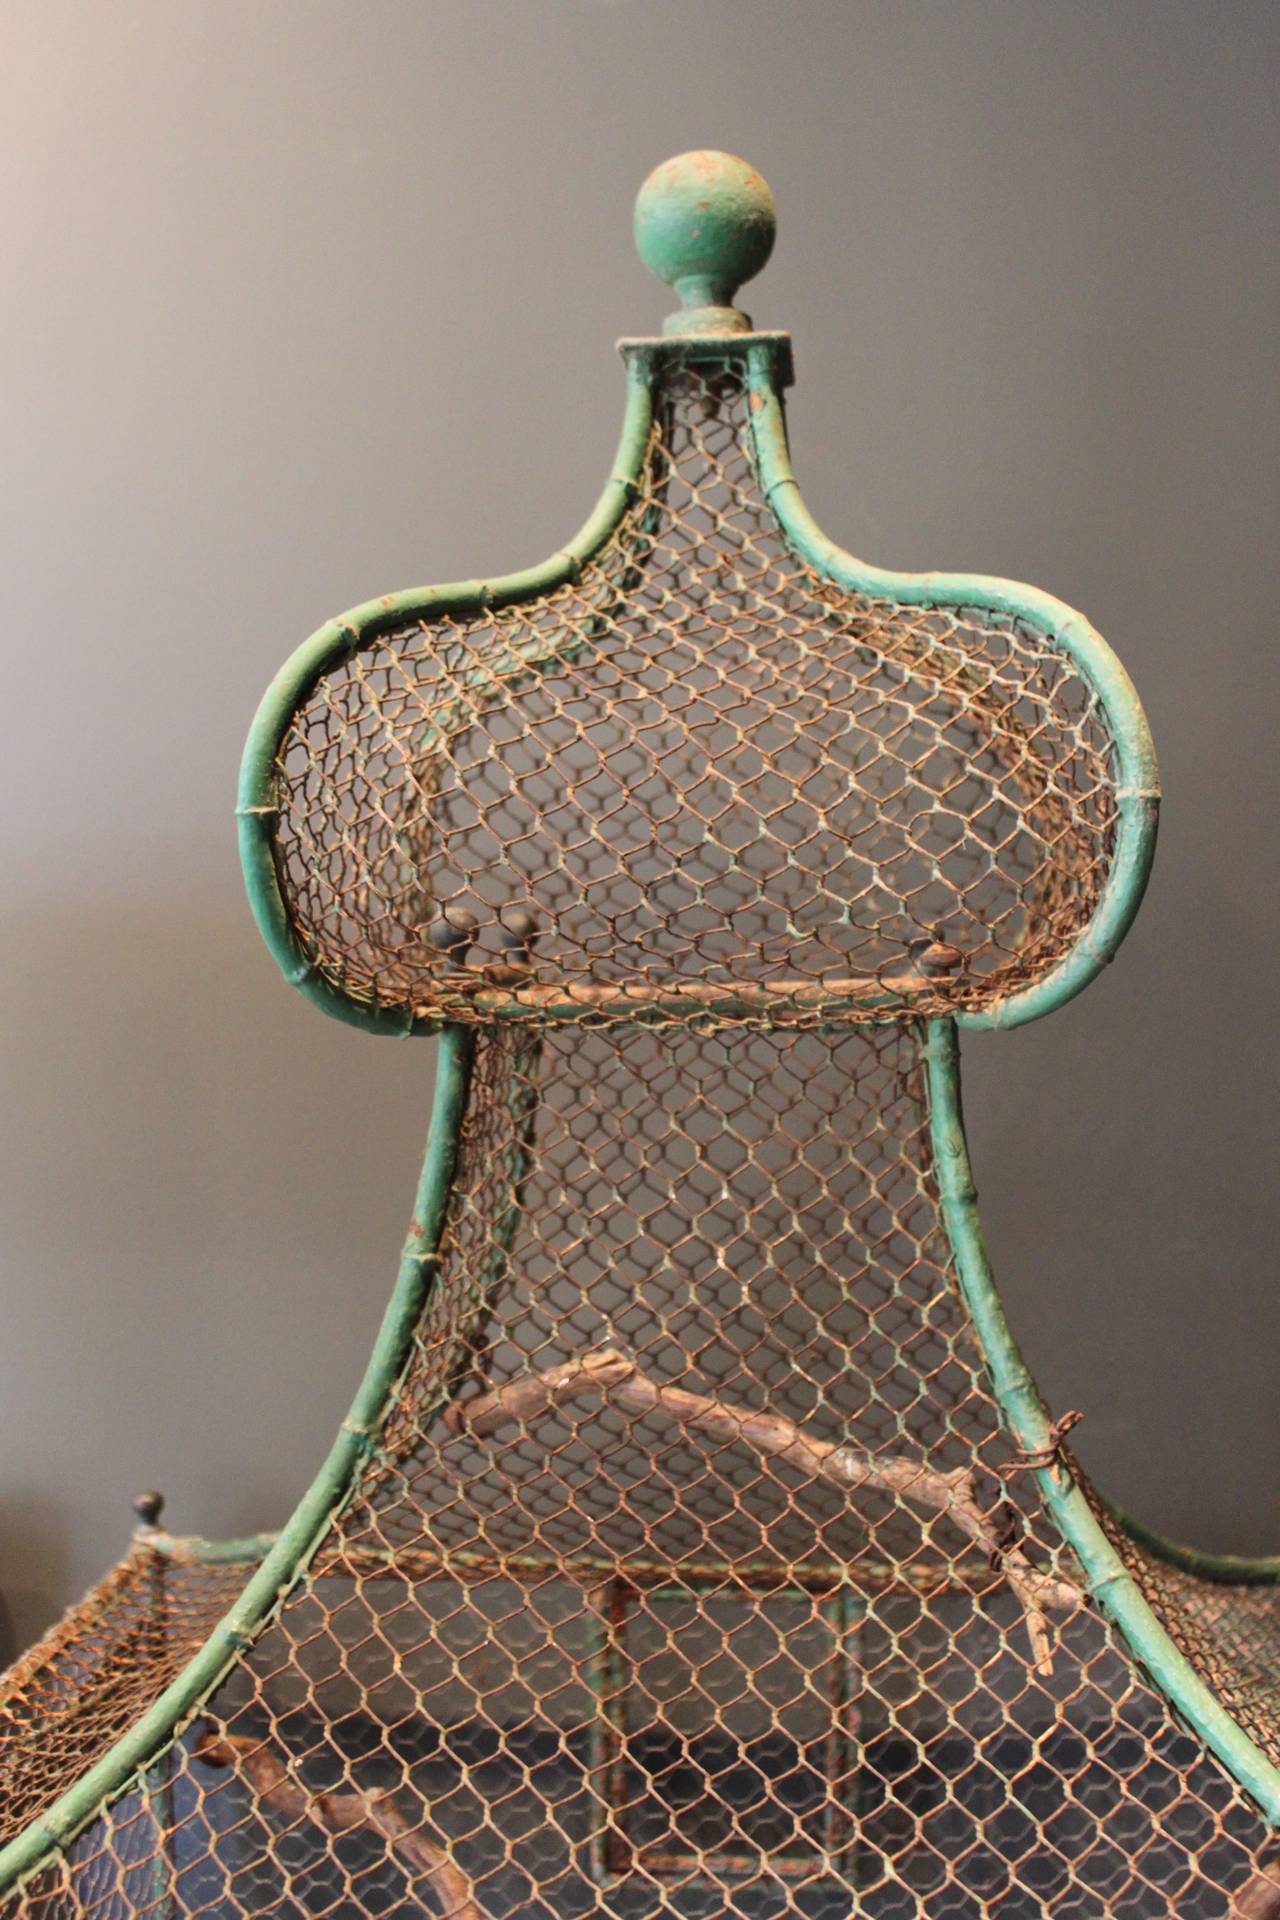 Wonderful and monumental 19th century French green painted bird cage. This bird cage has a fantastic worn painted finish and various wooden twigs wired to interior. Legs are on casters and top has a pagoda shape detail with ball finials at the top